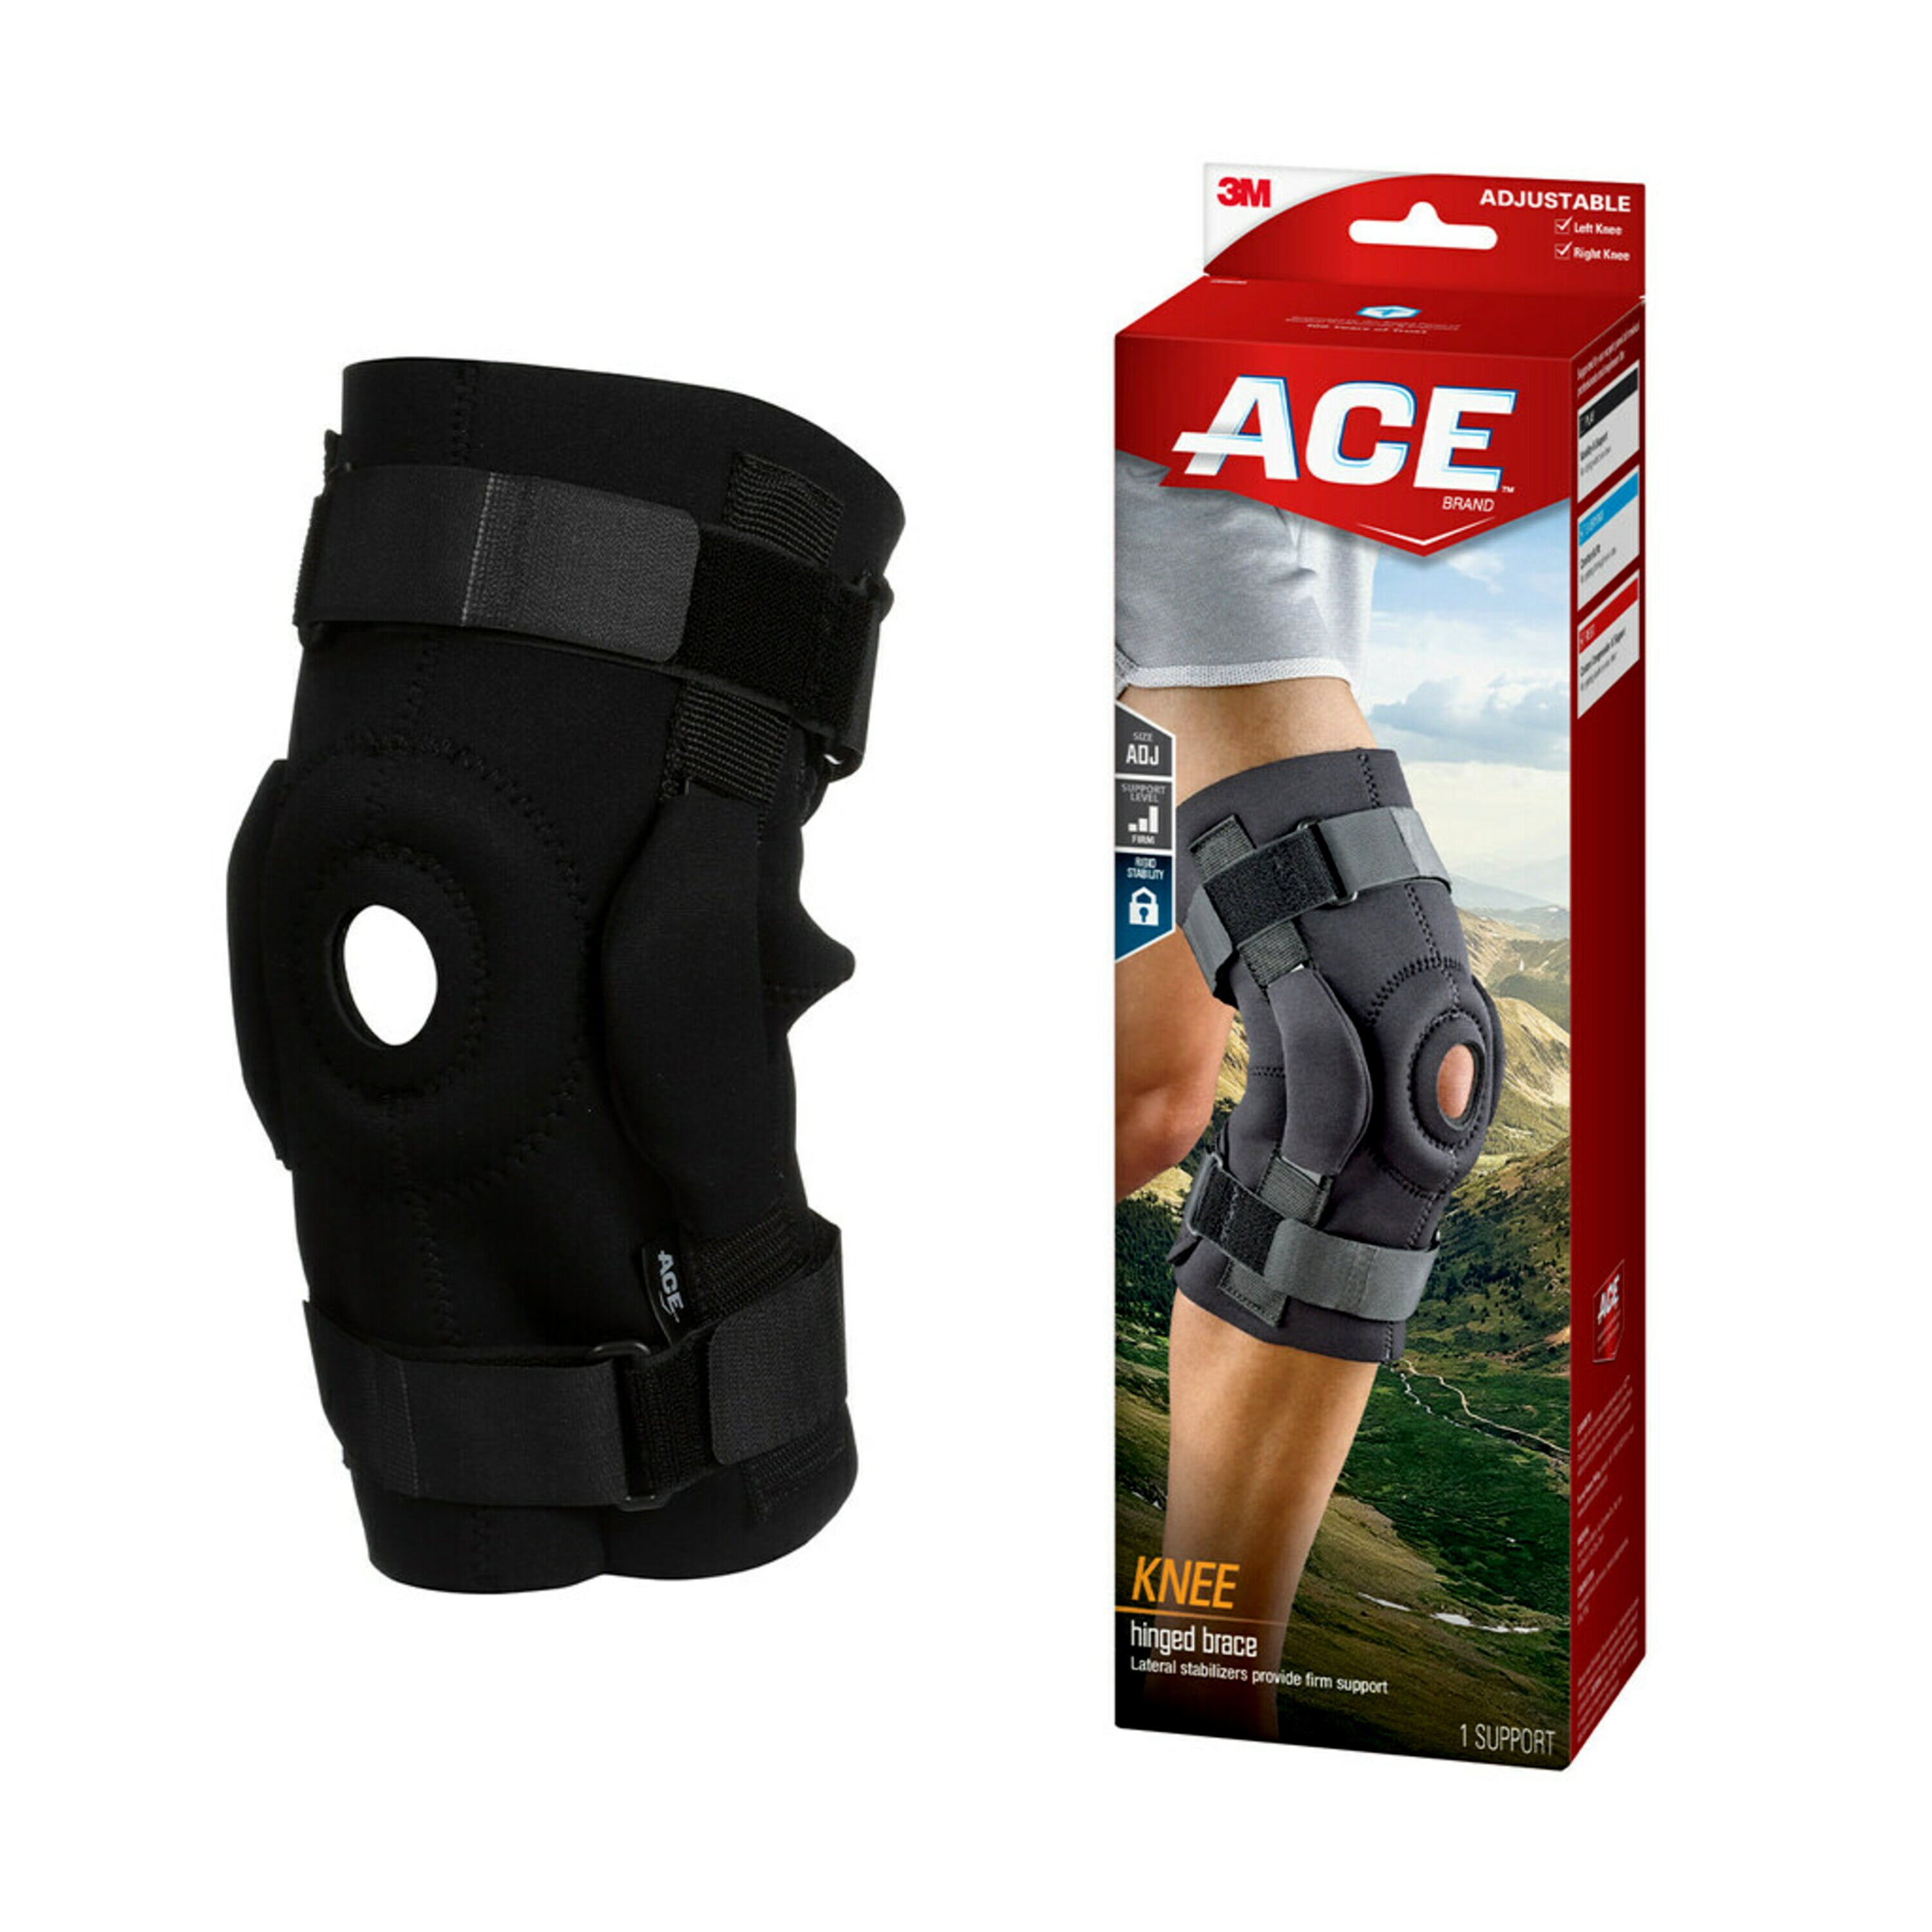 ROM Hinged Knee Brace for Men & Women – Post Op Knee Leg Compression,  Stabilizer & Support Wrap for Swollen ACL, MCL, Tendon, Athletic Injury